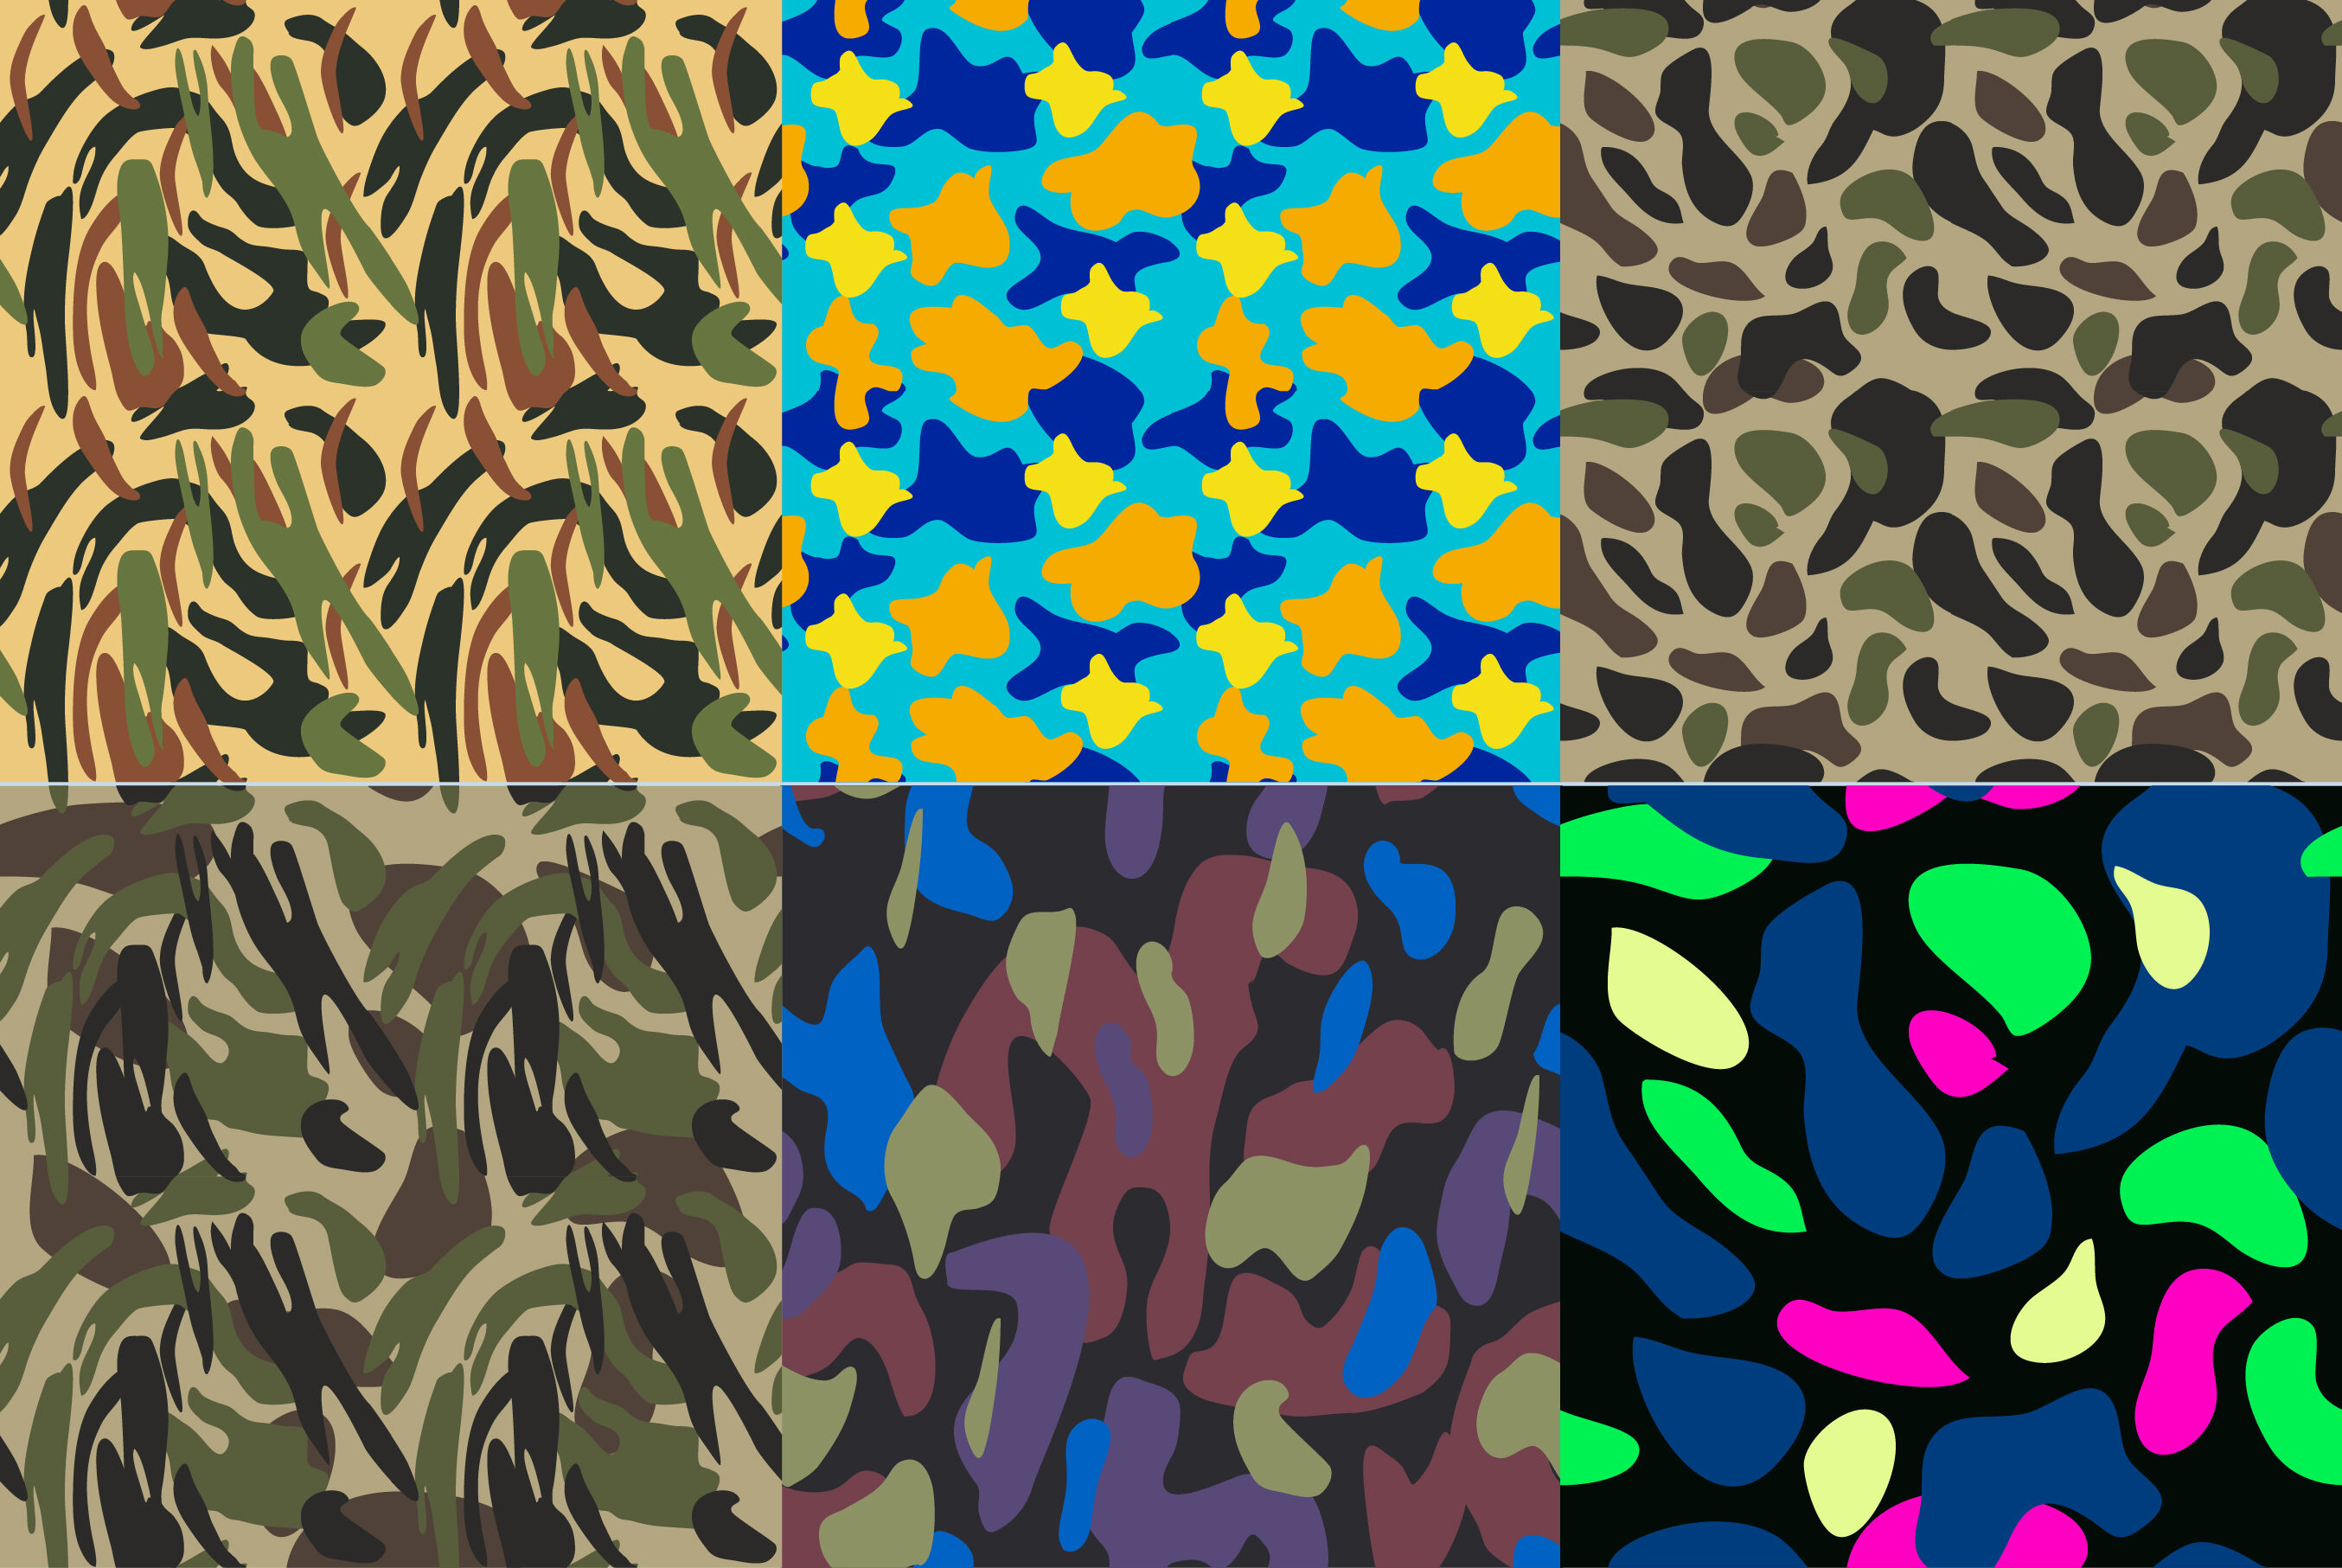 Camouflage pattern background seamless vector illustration By ImpressinArt